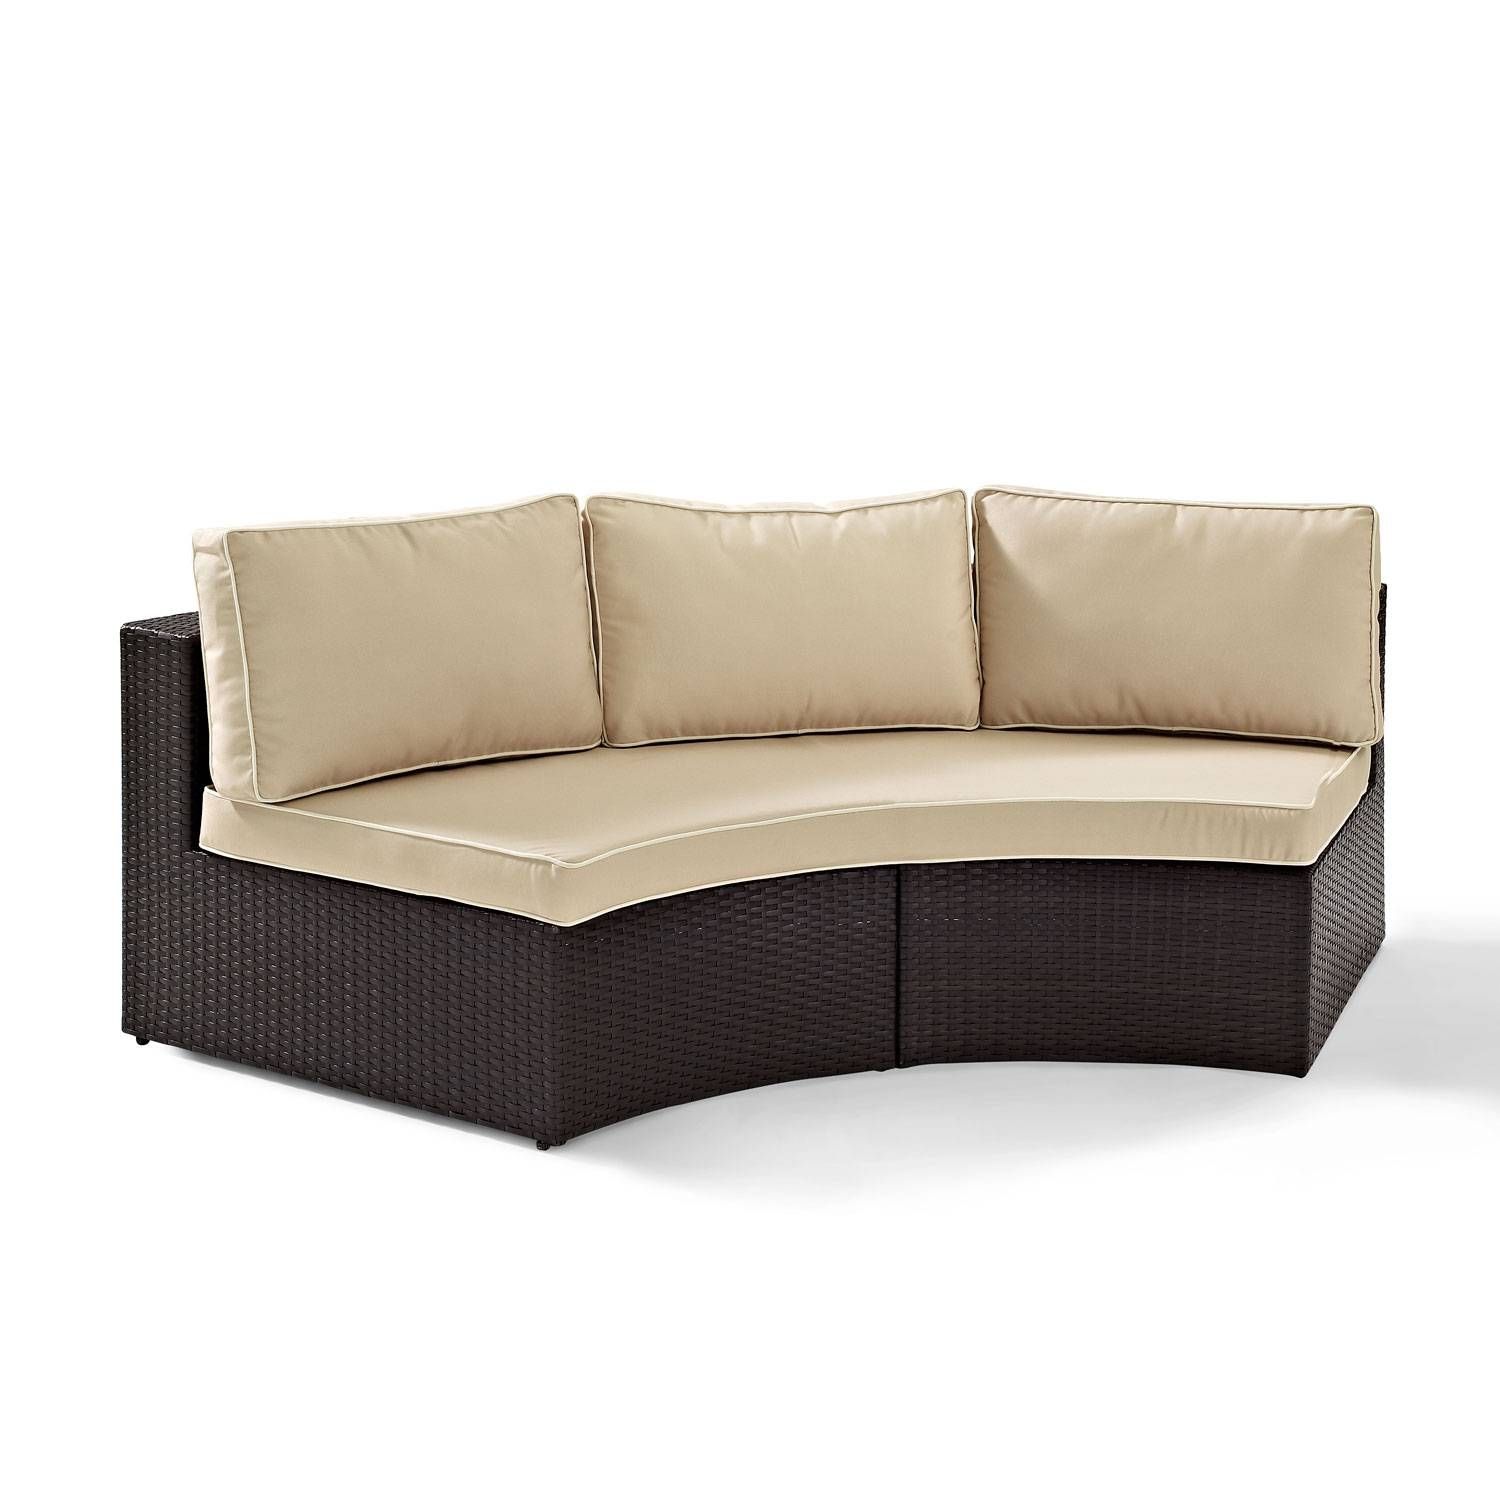 Catalina Outdoor Wicker Round Sectional Sofa With Sand Cushions Within Round Sectional Sofa (View 28 of 30)